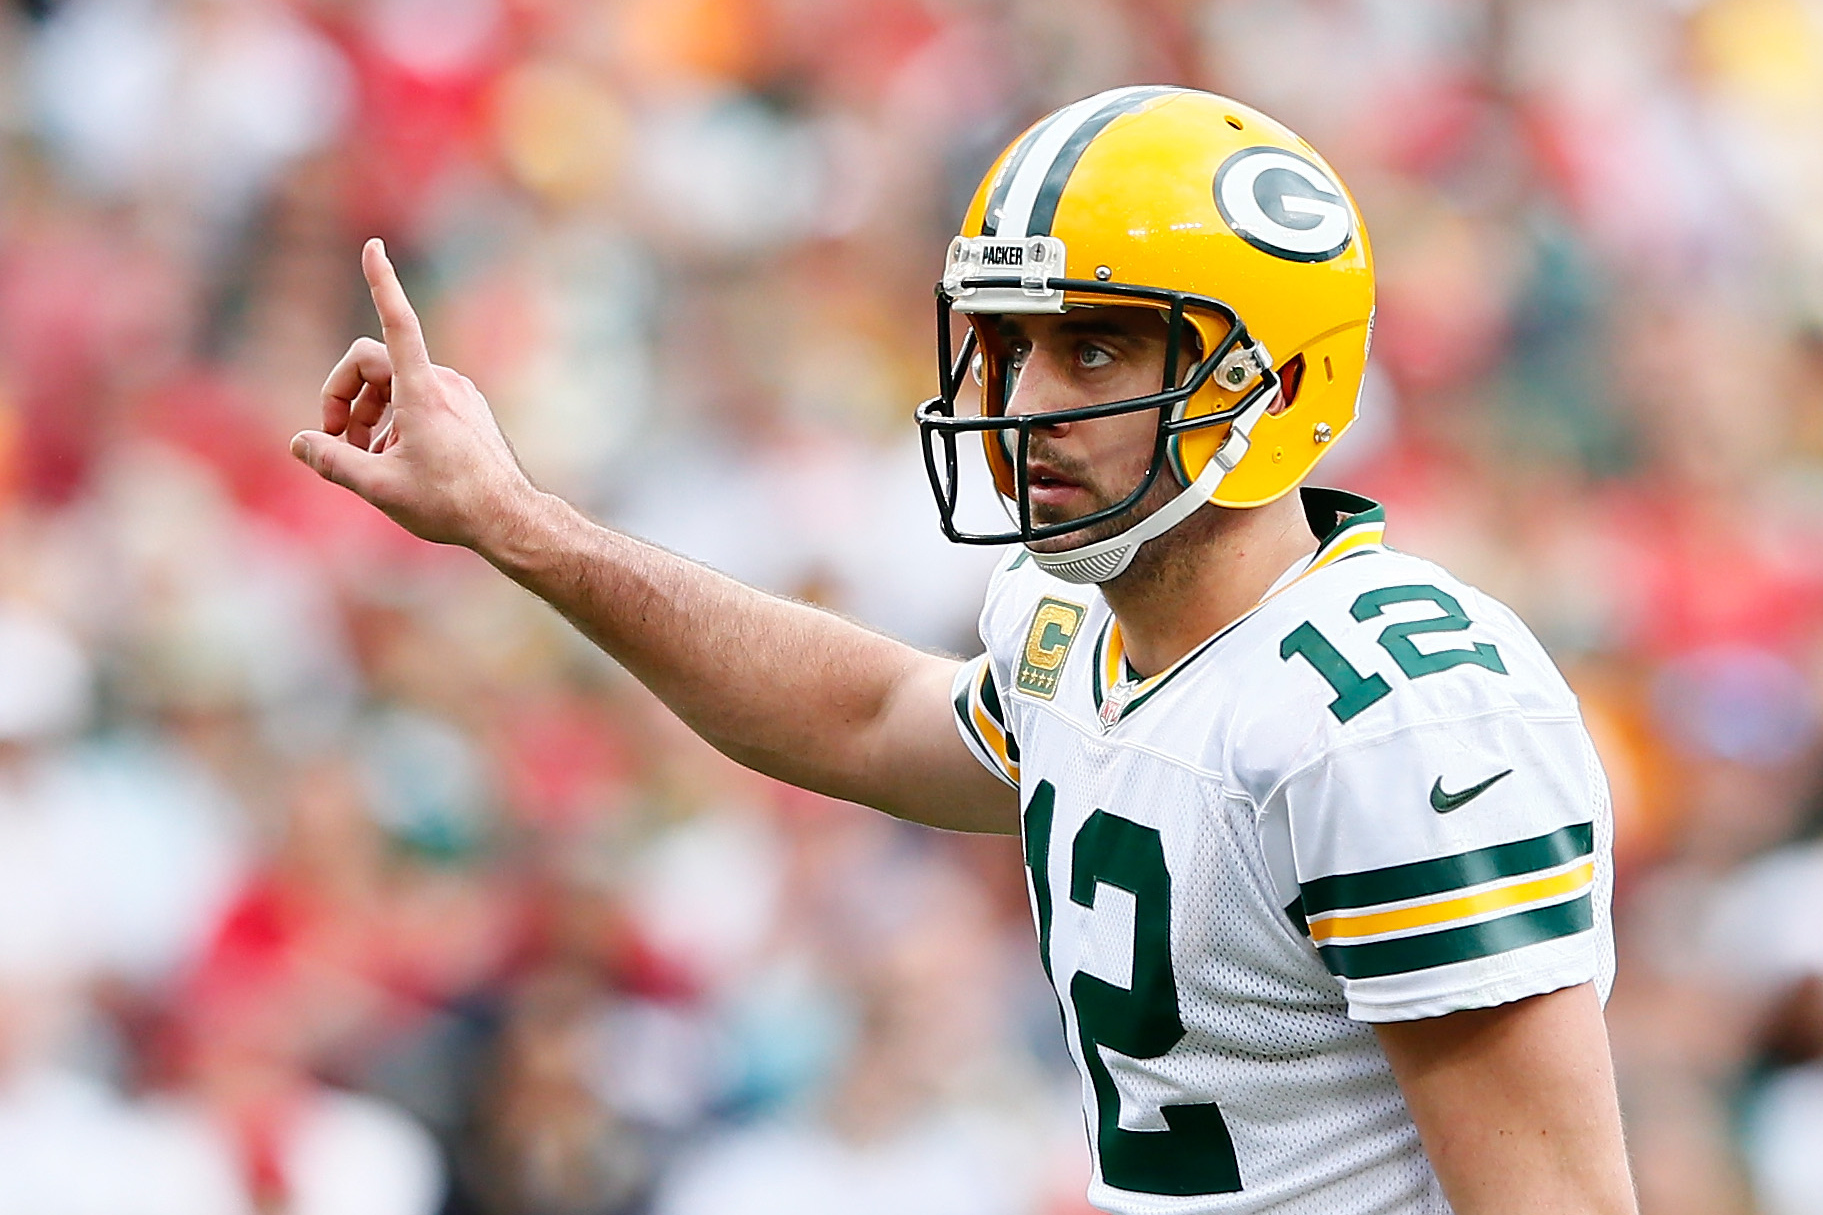 Packers lock up third NFC North title in a row